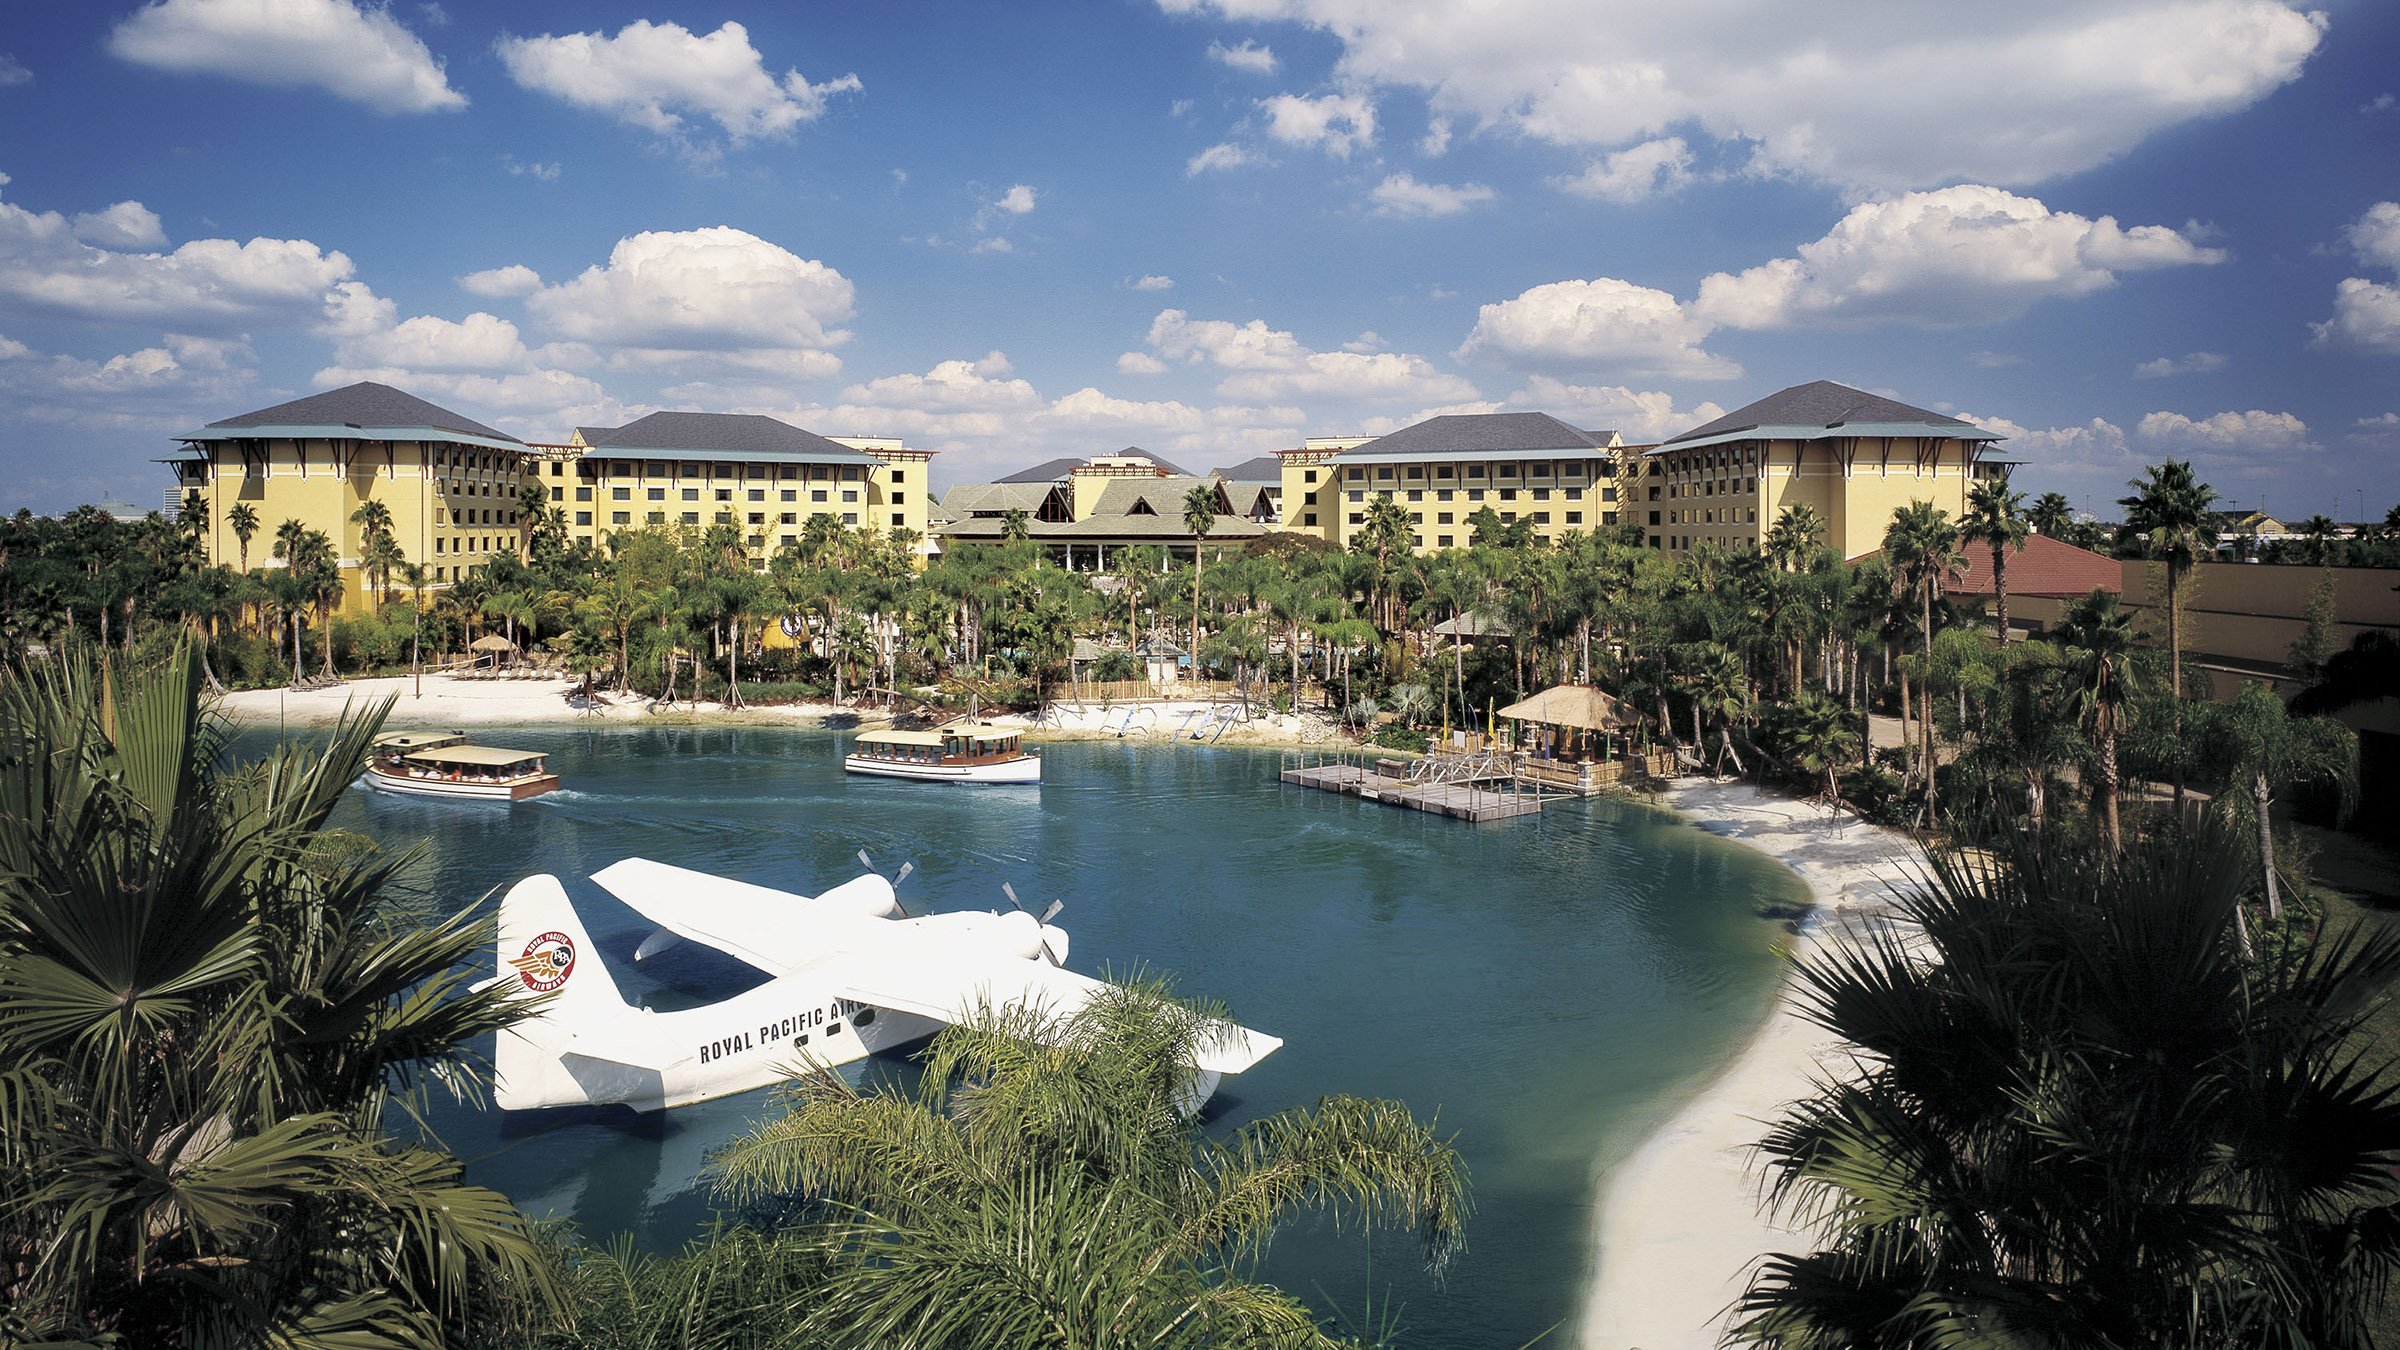 View of the buildings and waterfront at the Loews Royal Pacific Resort in Orlando, Florida